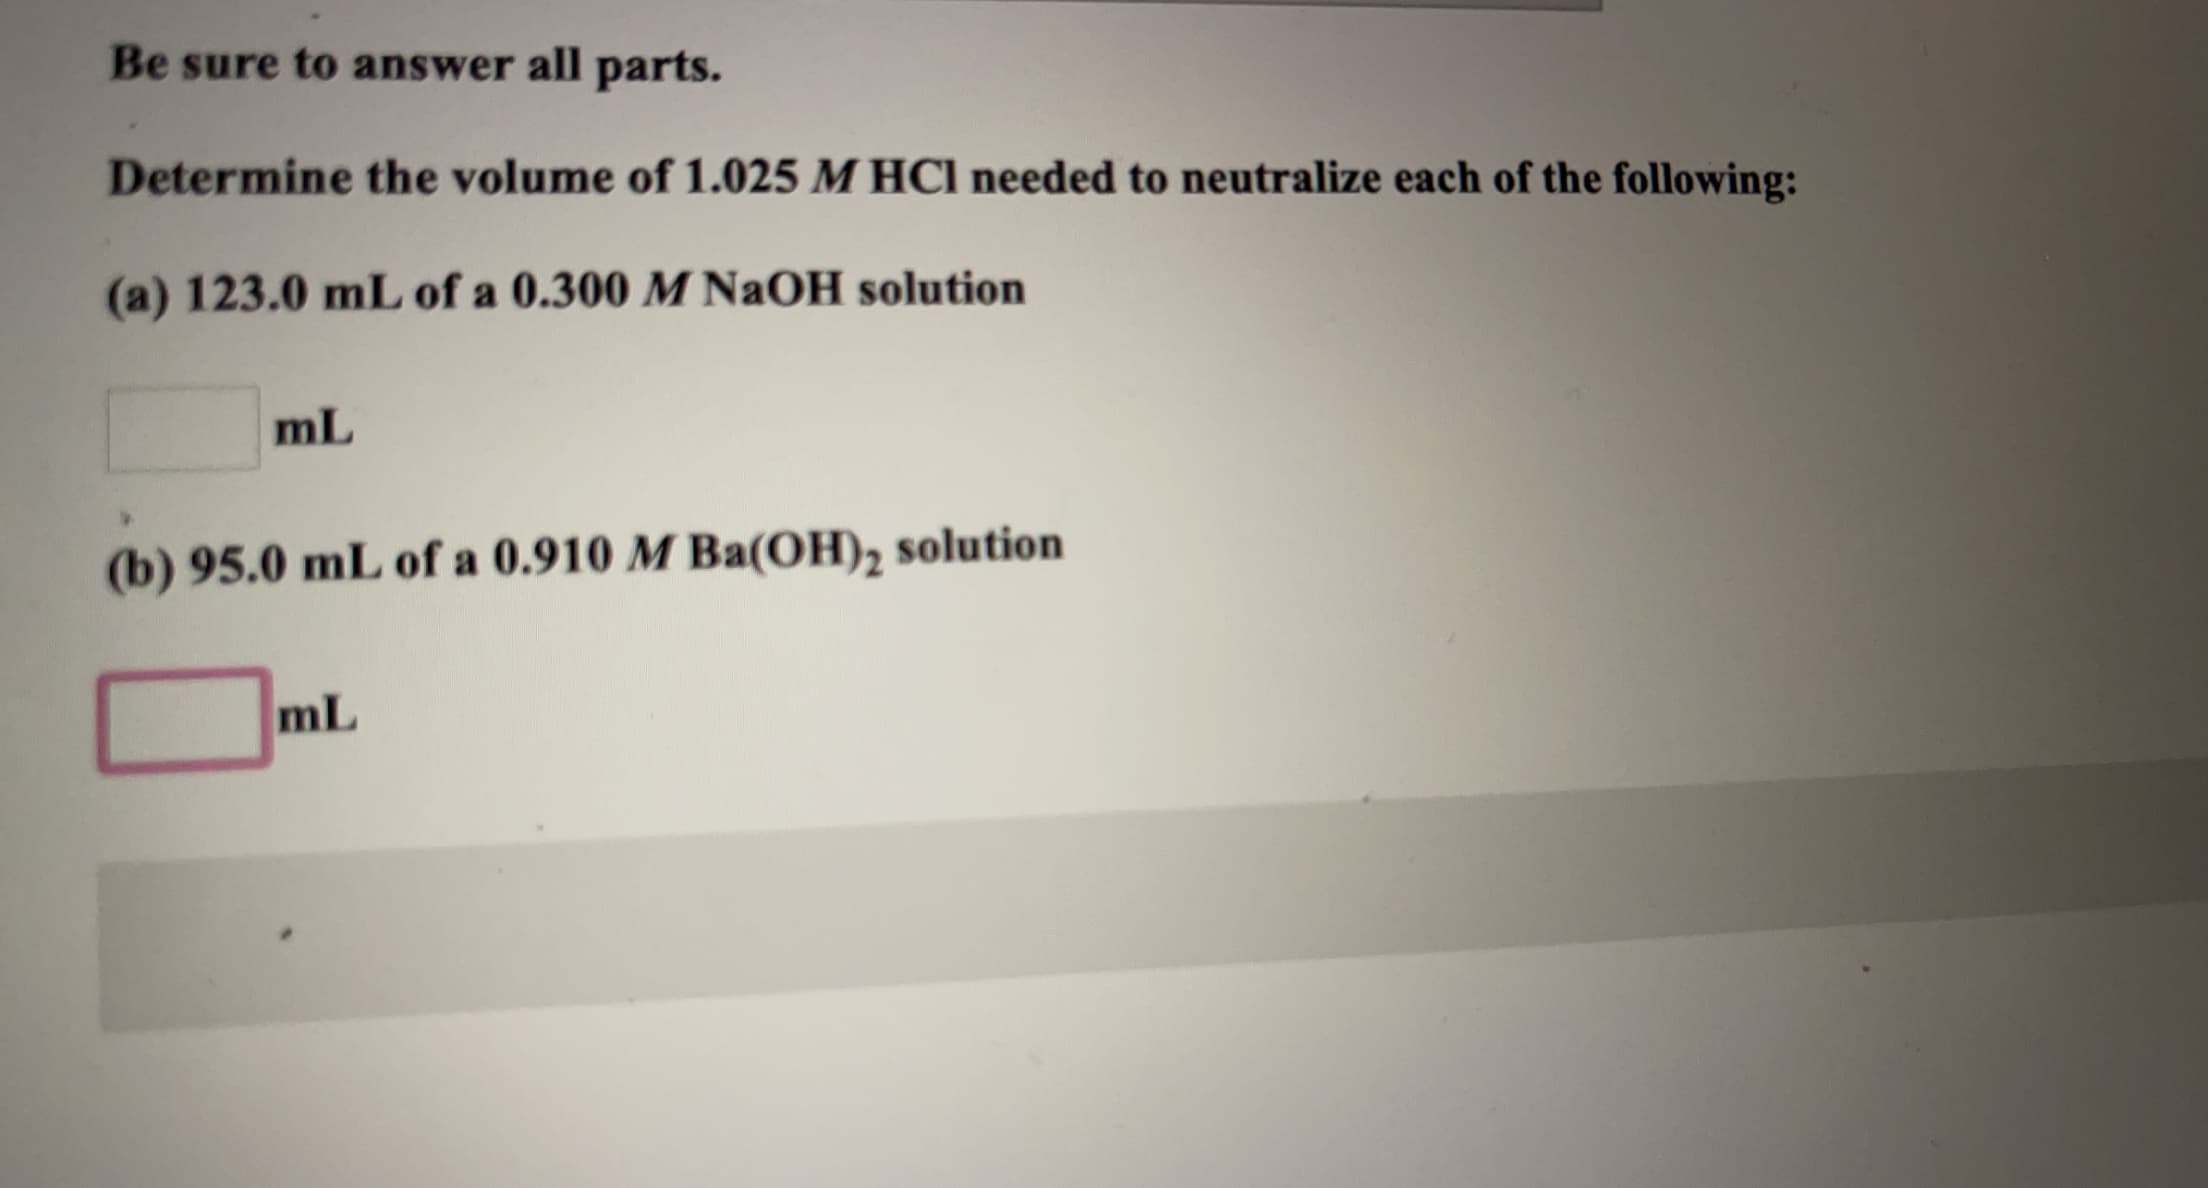 Be sure to answer all parts.
Determine the volume of 1.025 M HCl needed to neutralize each of the following:
(a) 123.0 mL of a 0.300 M NaOH solution
mL
(b) 95.0 mL of a 0.910 M Ba(OH), solution
mL
